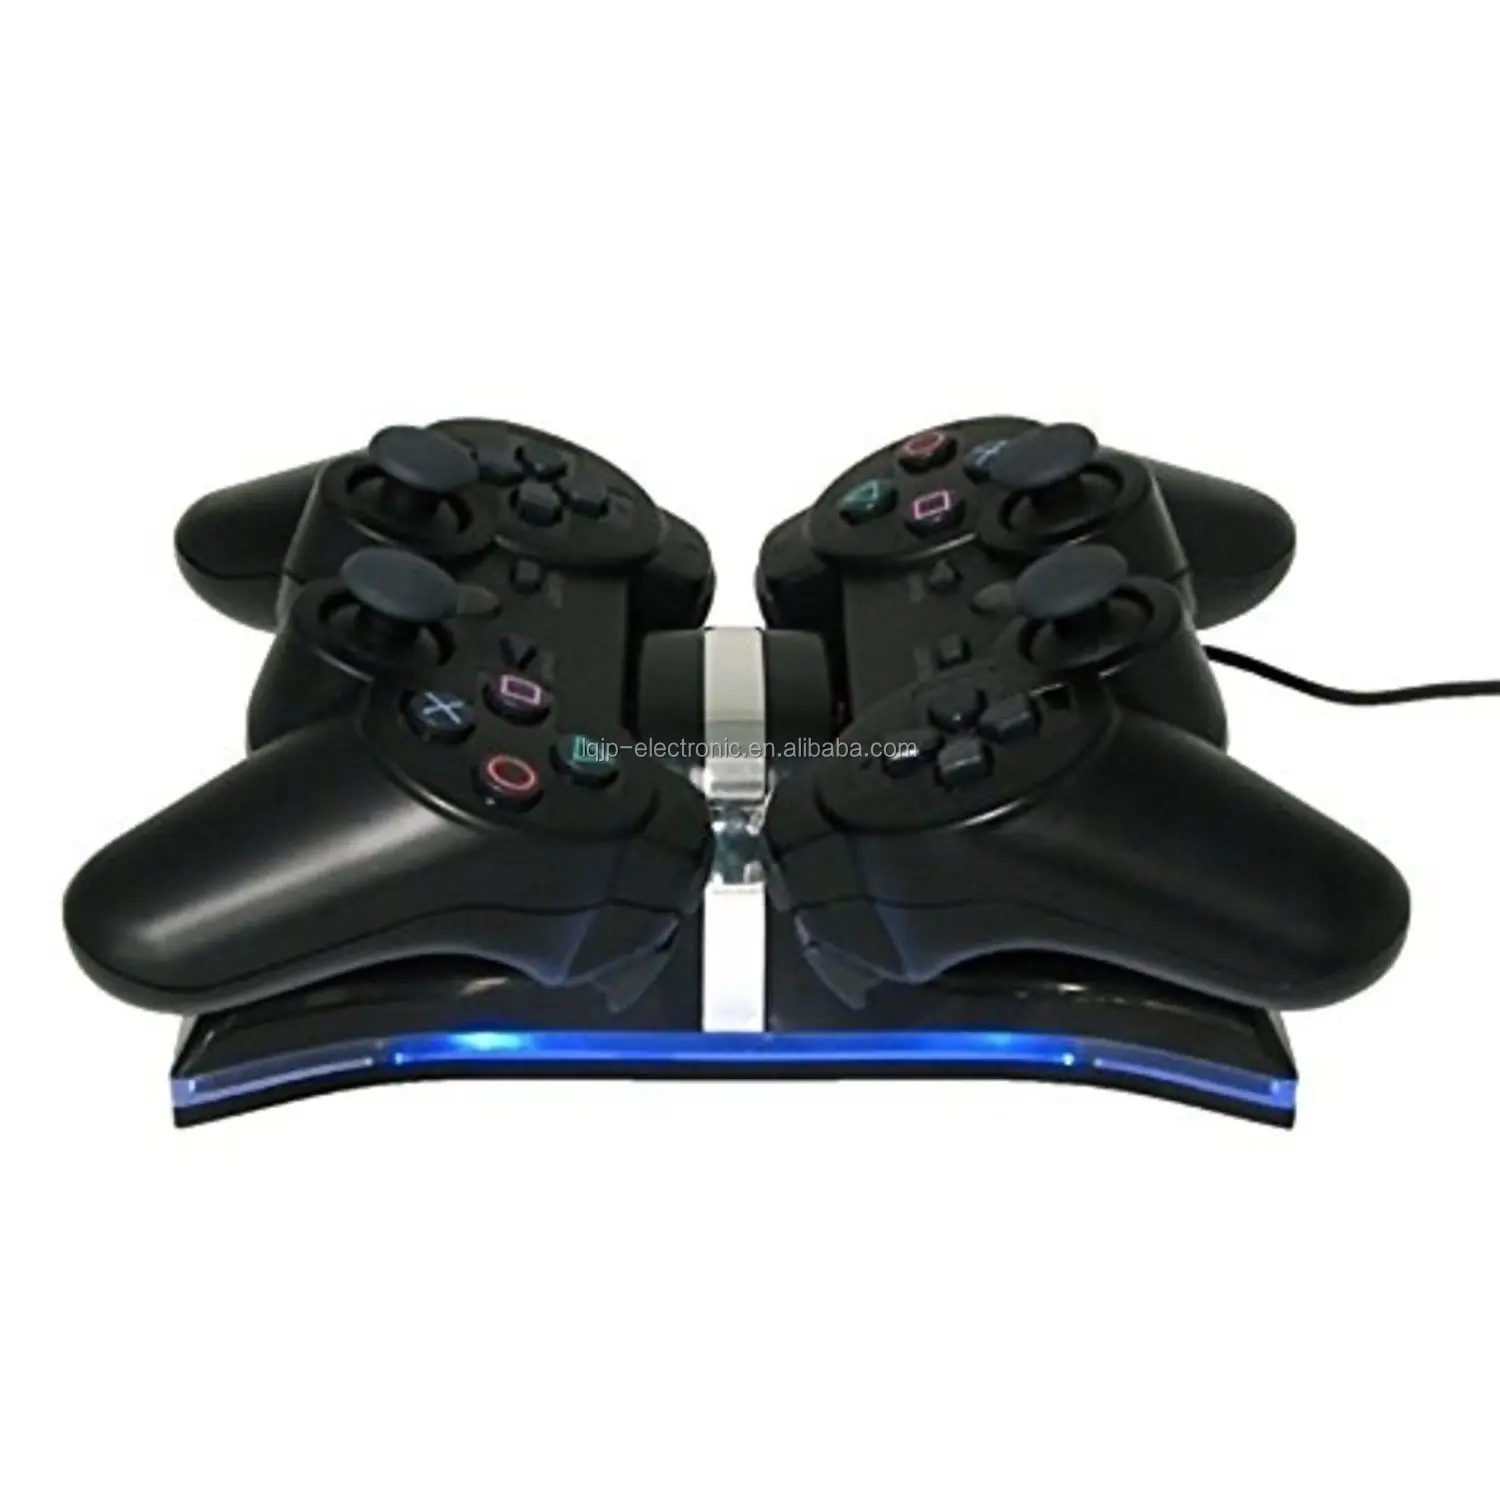 playstation 3 remote control charger